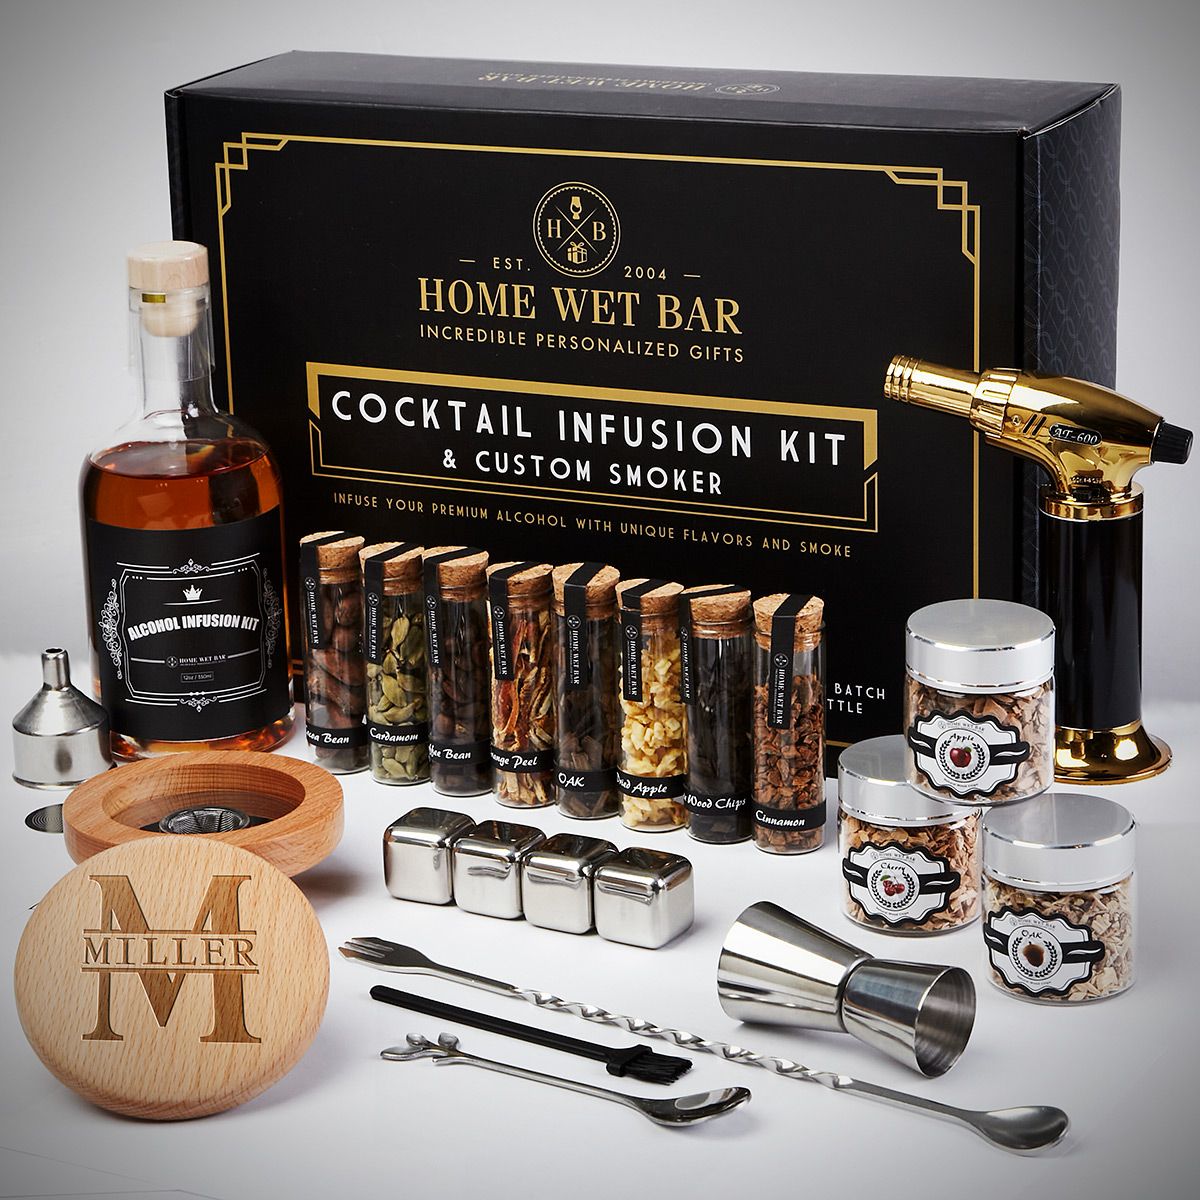 https://images.homewetbar.com/media/catalog/product/c/o/cocktail-infusion-with-smoker-kit-oakmont-s-10939.jpg?store=default&image-type=image